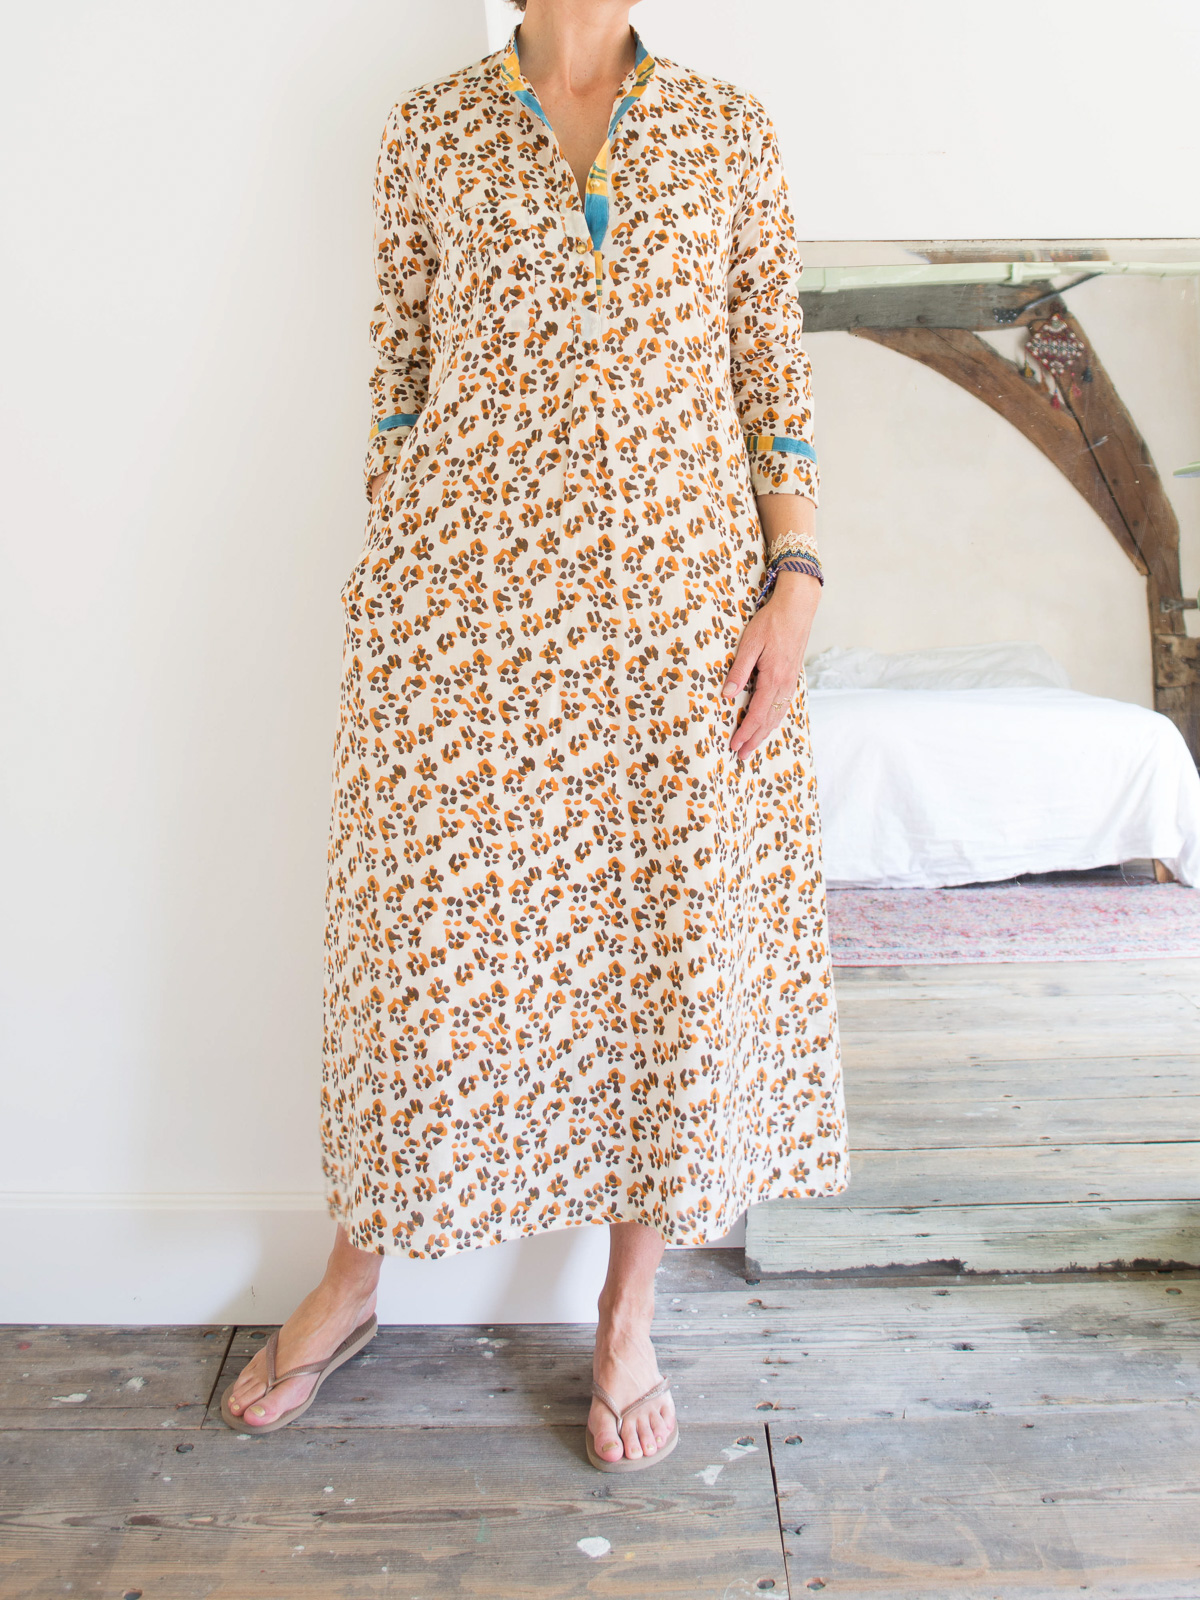 Long kurta - cream with brown and ocher 'panther' pattern